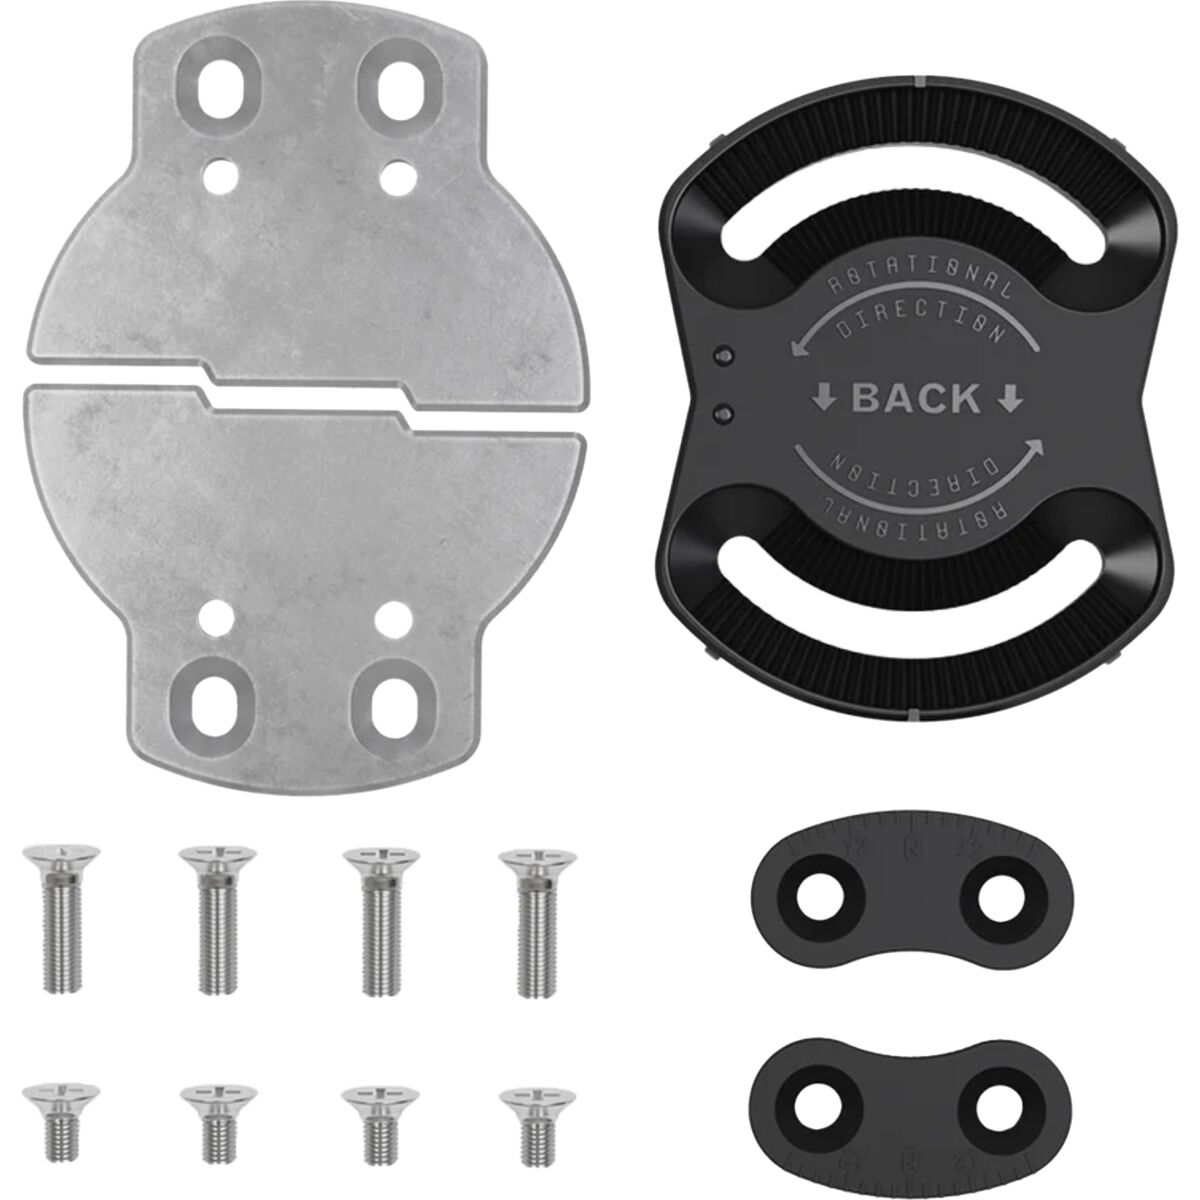 Union Charger Quiver Disk Kit